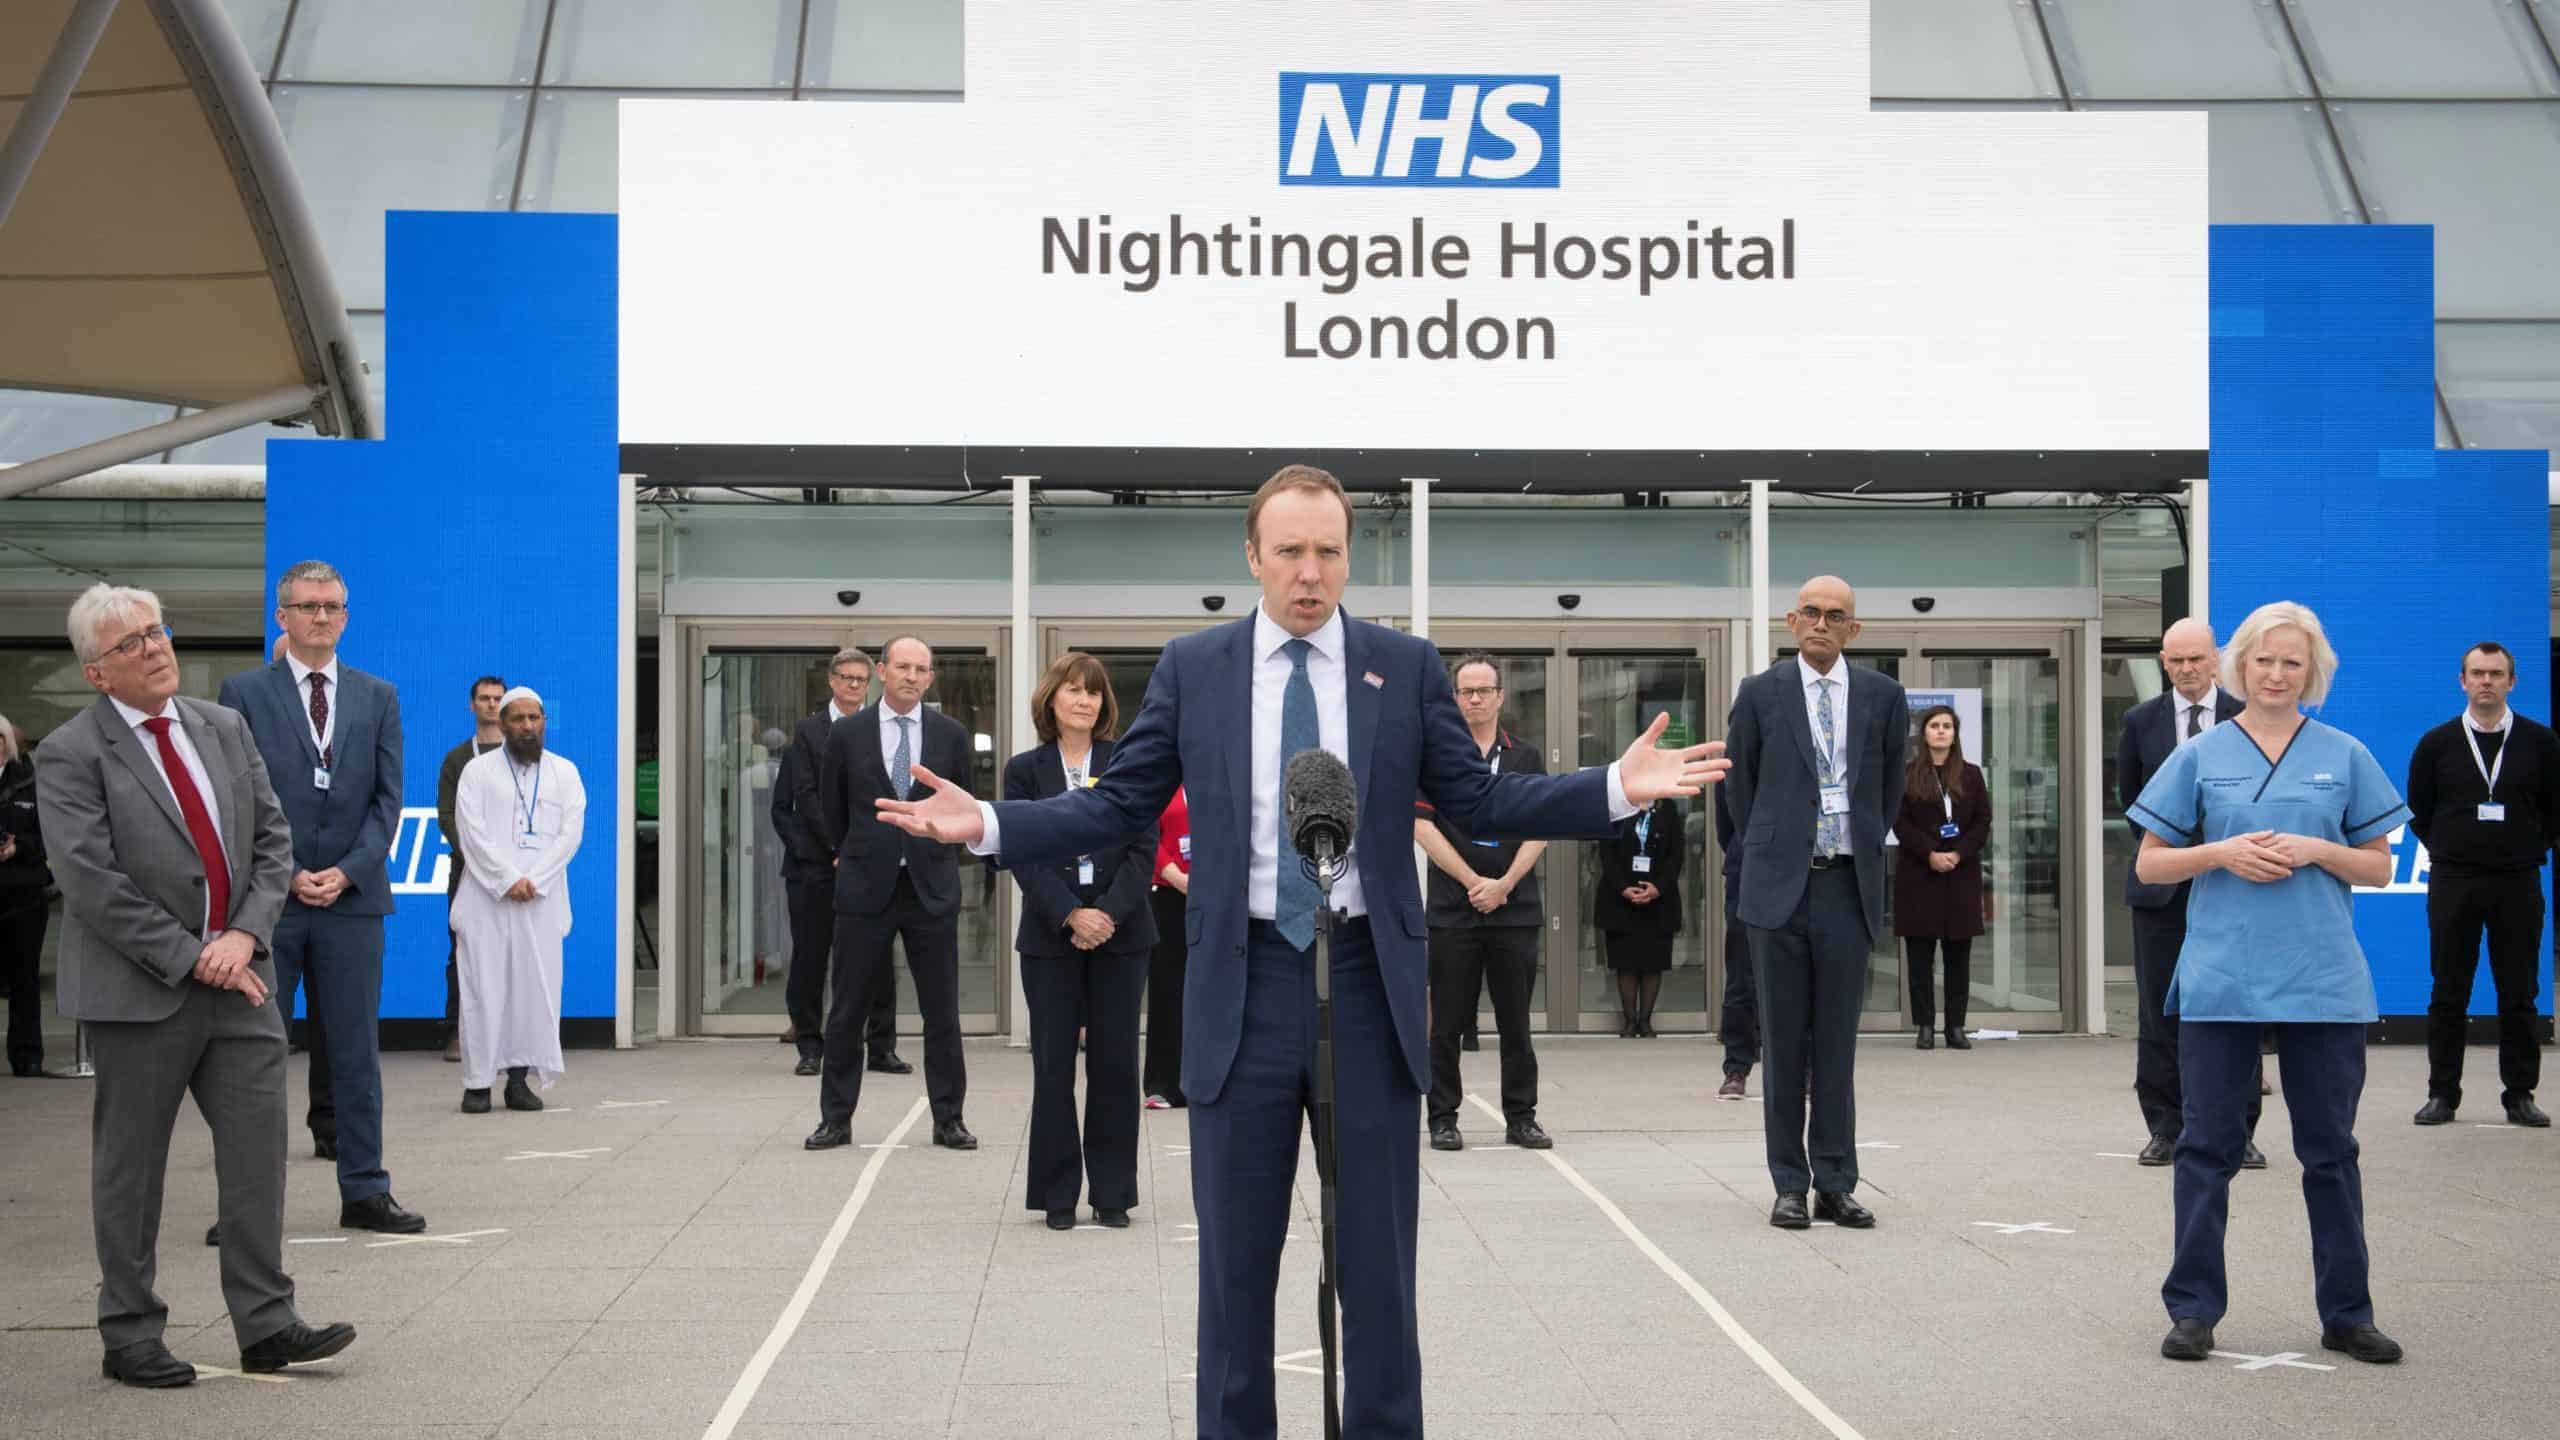 London NHS Nightingale hospital mothballed with no new admissions expected